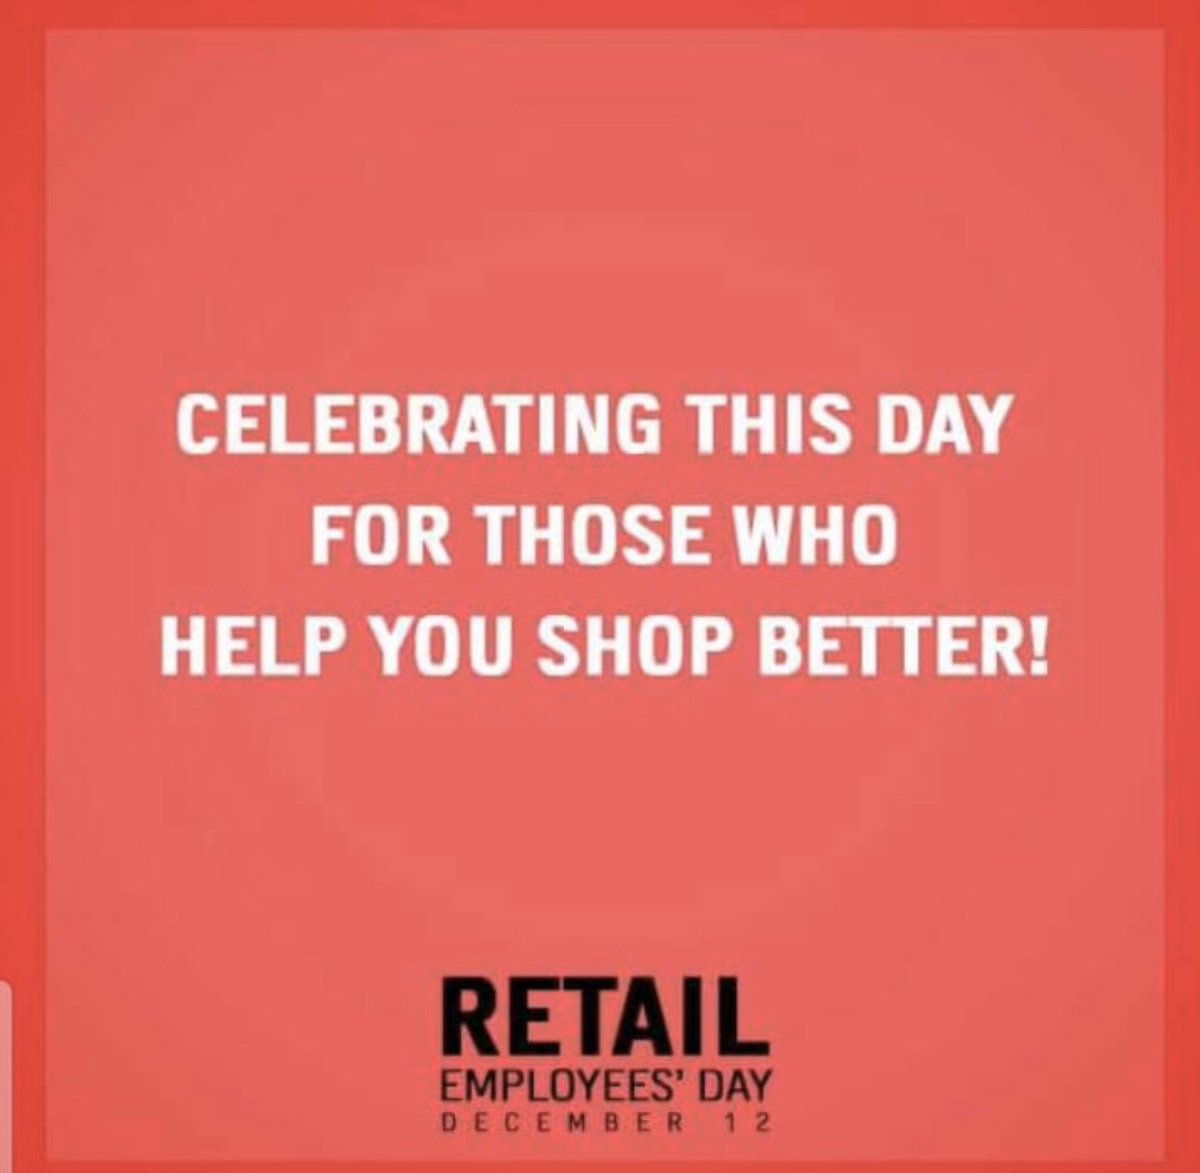 Once a retailer always a retailer, happy retail day to all who are making difference to our shopping experience & sincere gratitude 🙏 @rai_india @IndiaRetail @SupermarketWala @WorldRetail #retailemployeesday #Retail